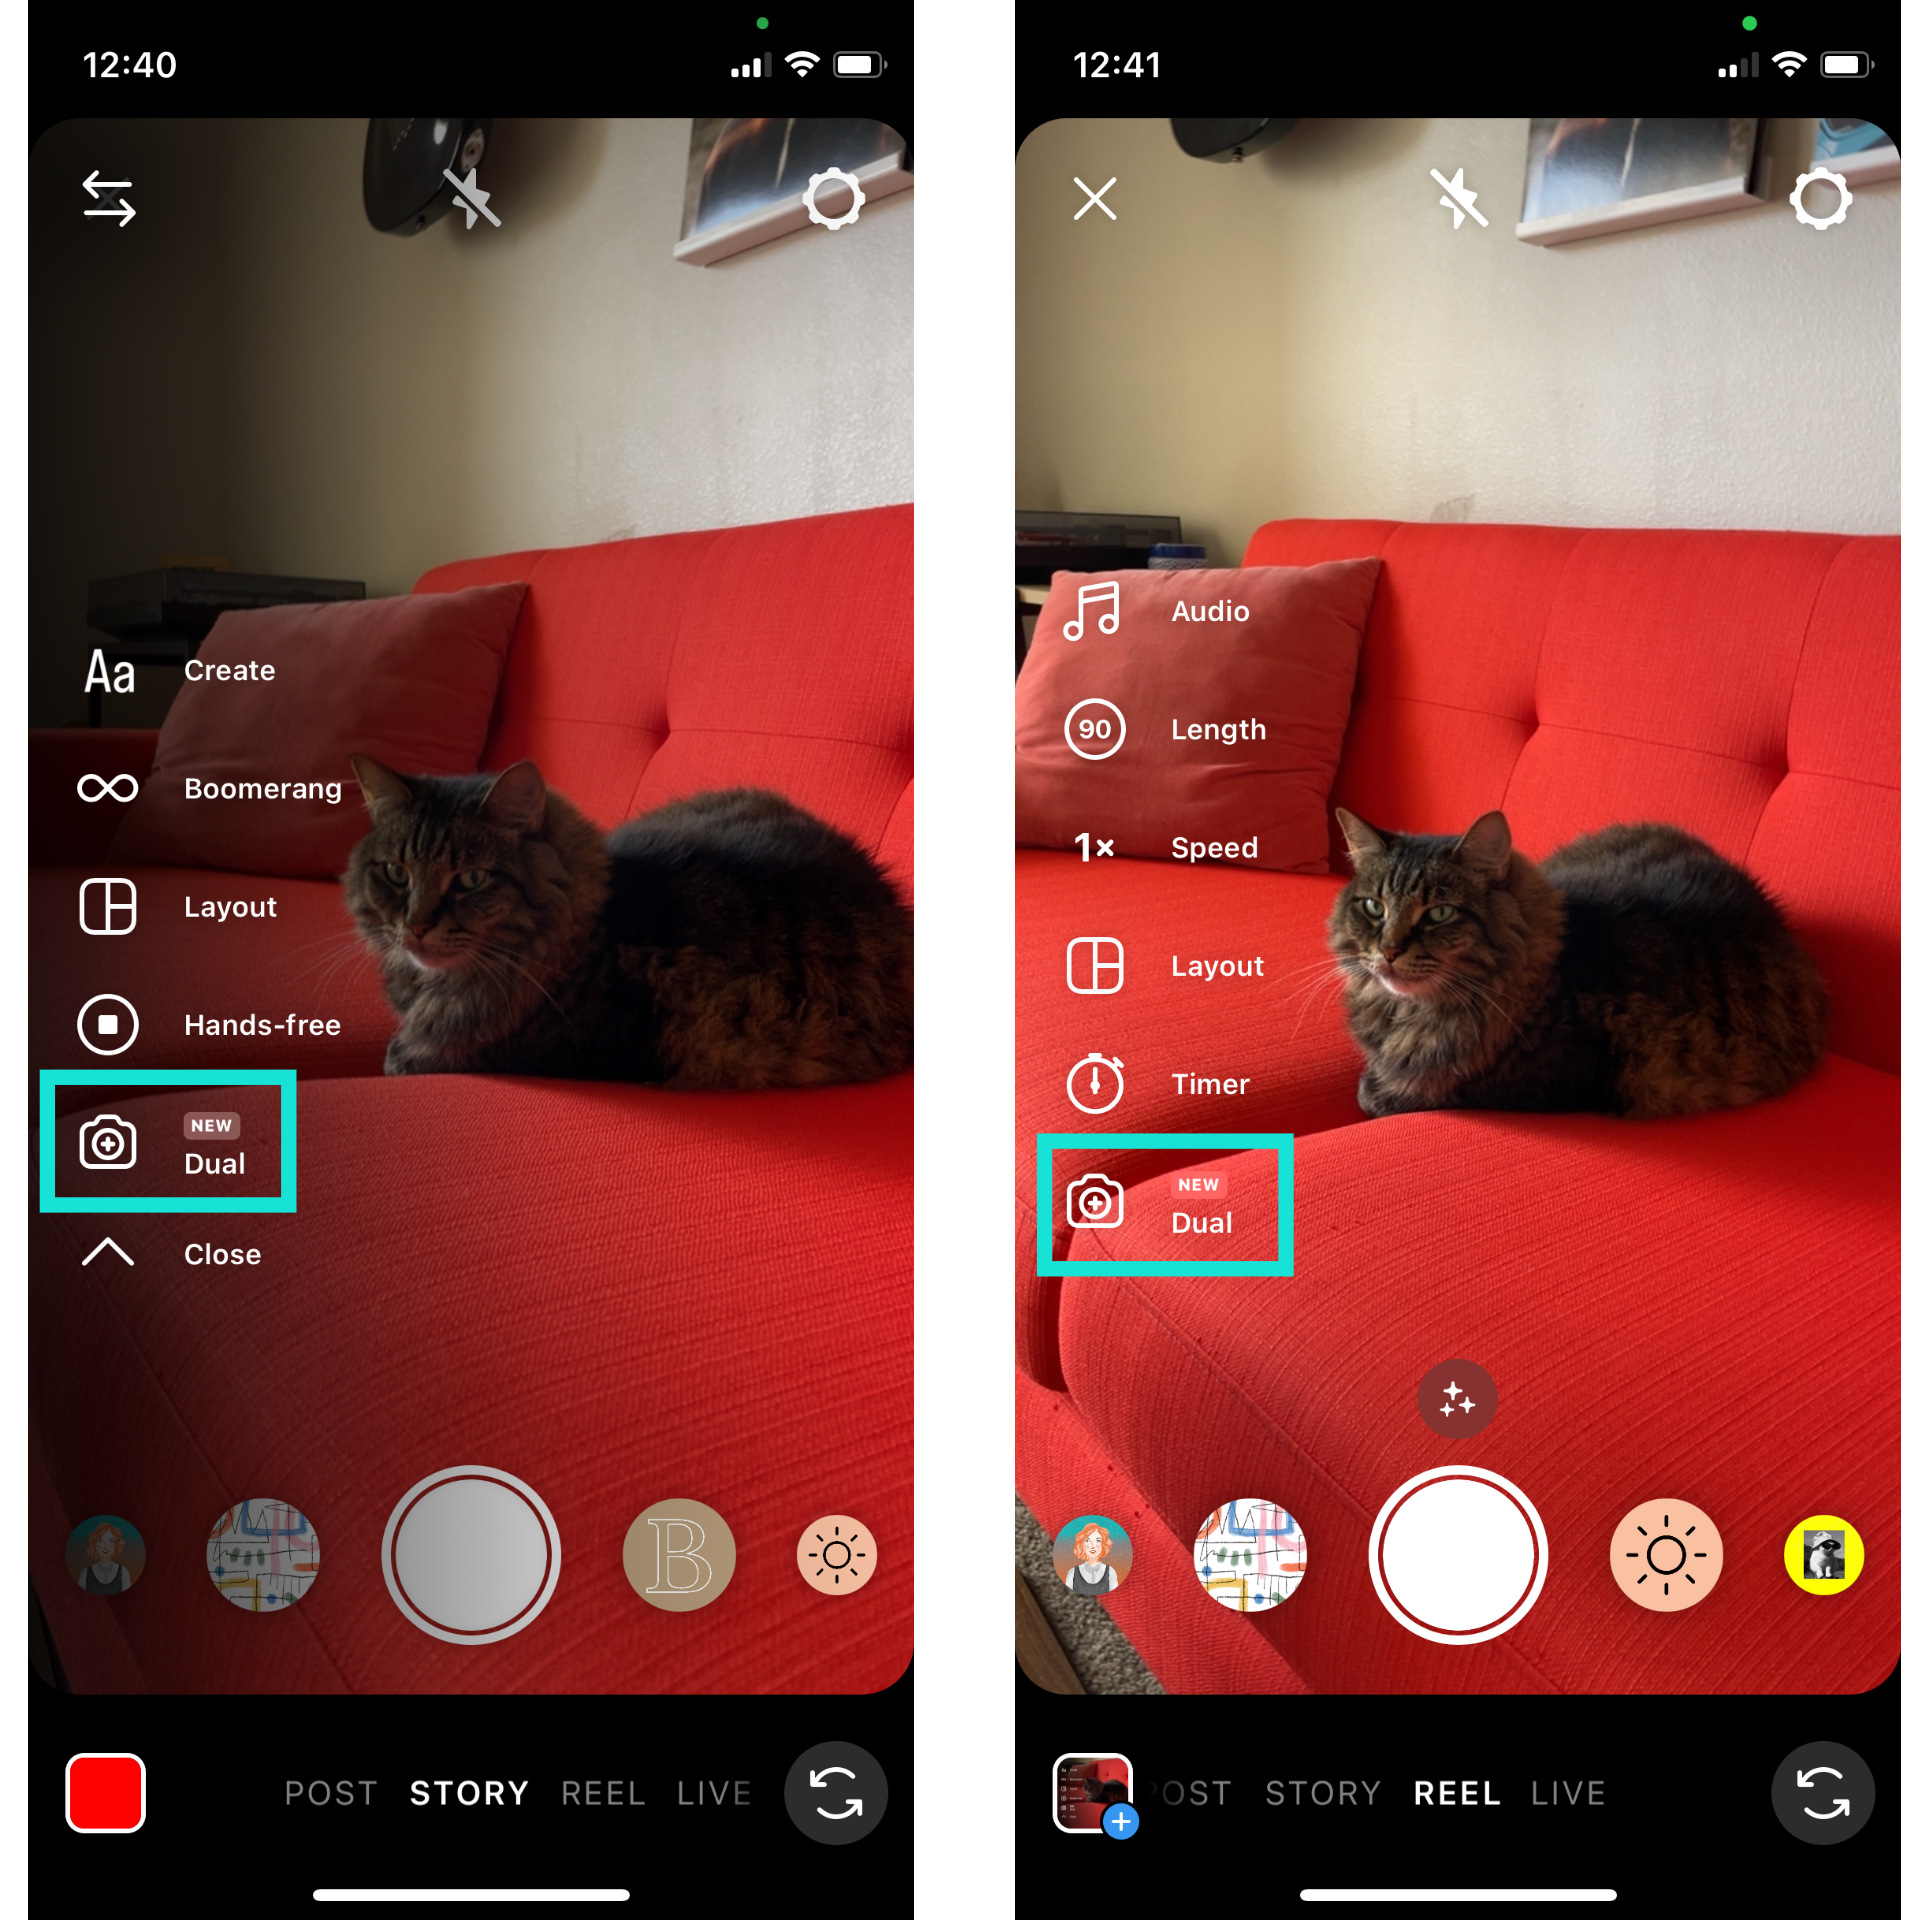 The Latest Instagram Updates: New Changes and Features